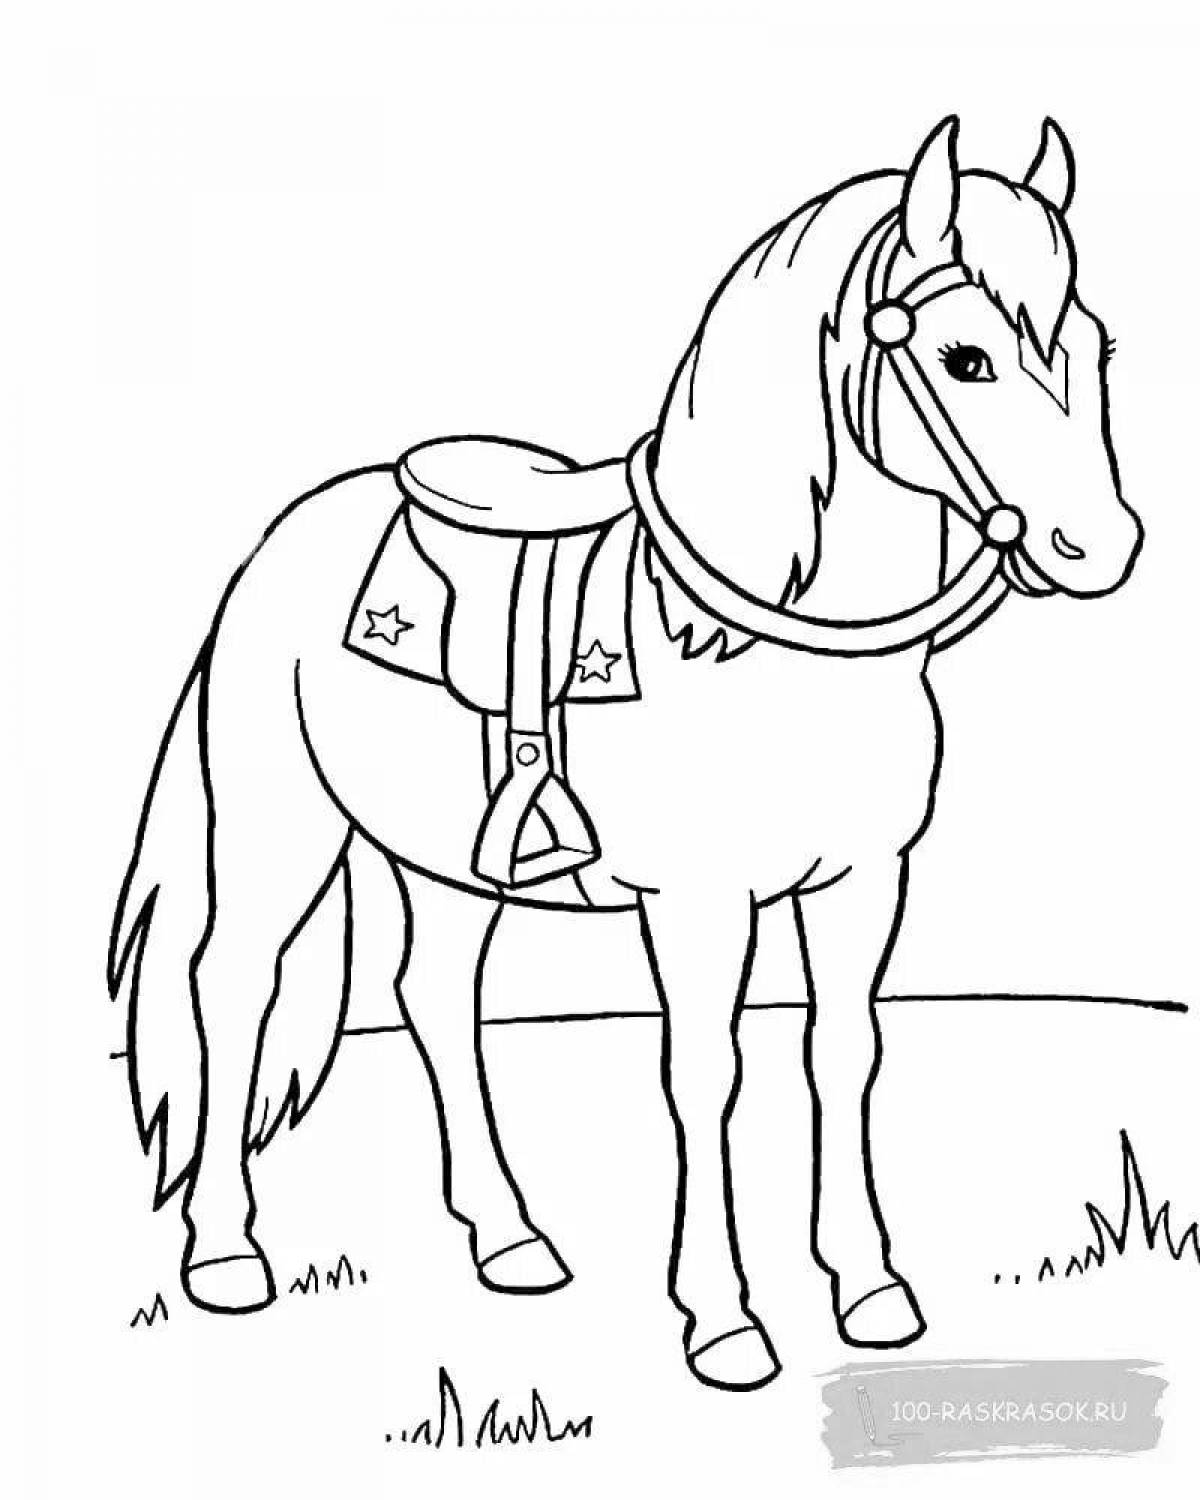 Exotic horse coloring book for children 6-7 years old